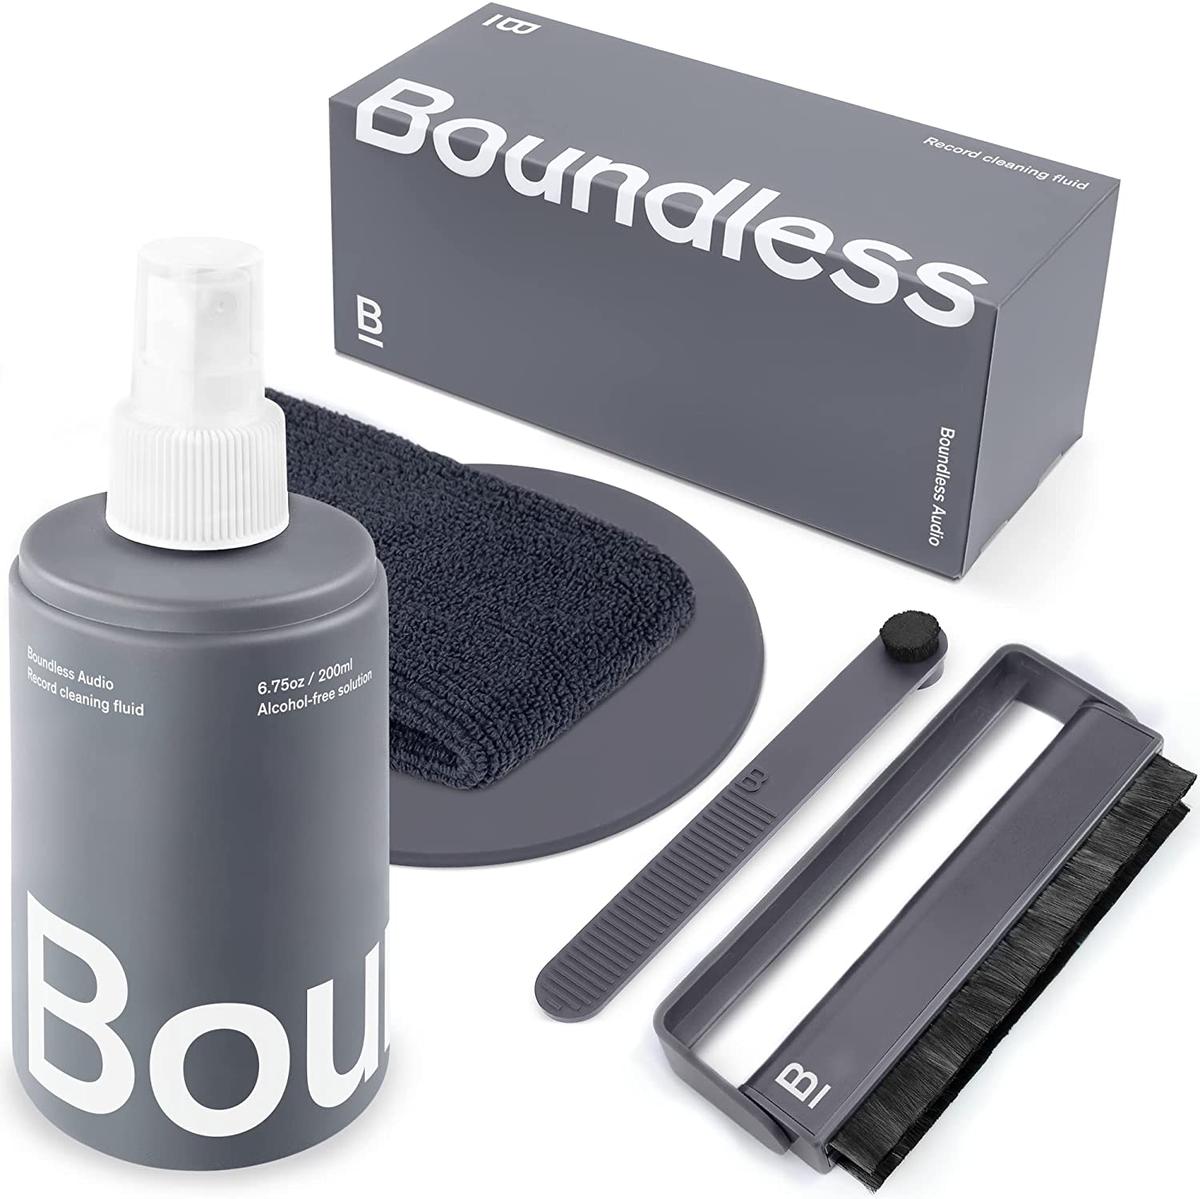 Boundless Audio Record Cleaning Kit